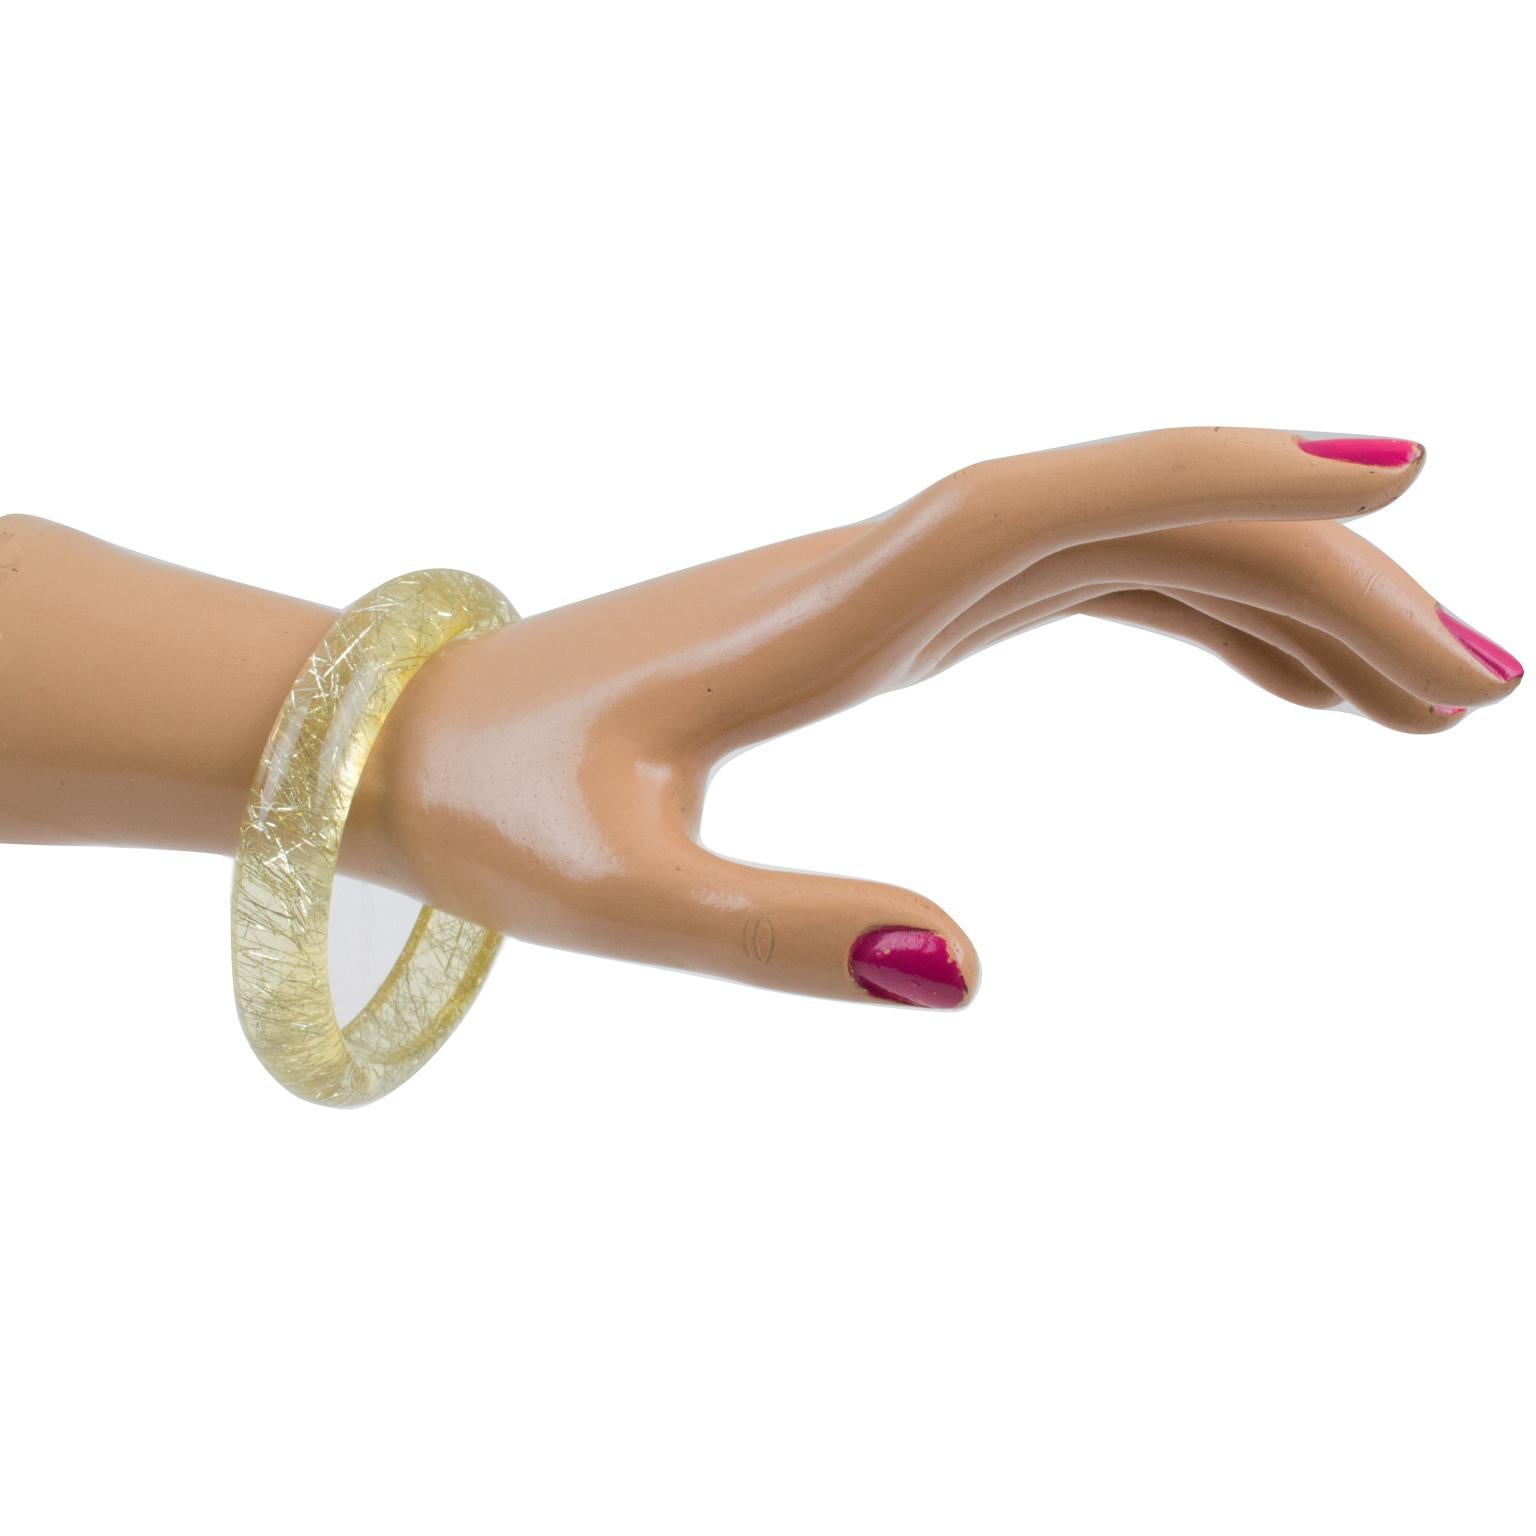 Lucite Bracelet Bangle Yellow Lemon with Silver Metallic Thread Inclusions In Excellent Condition For Sale In Atlanta, GA